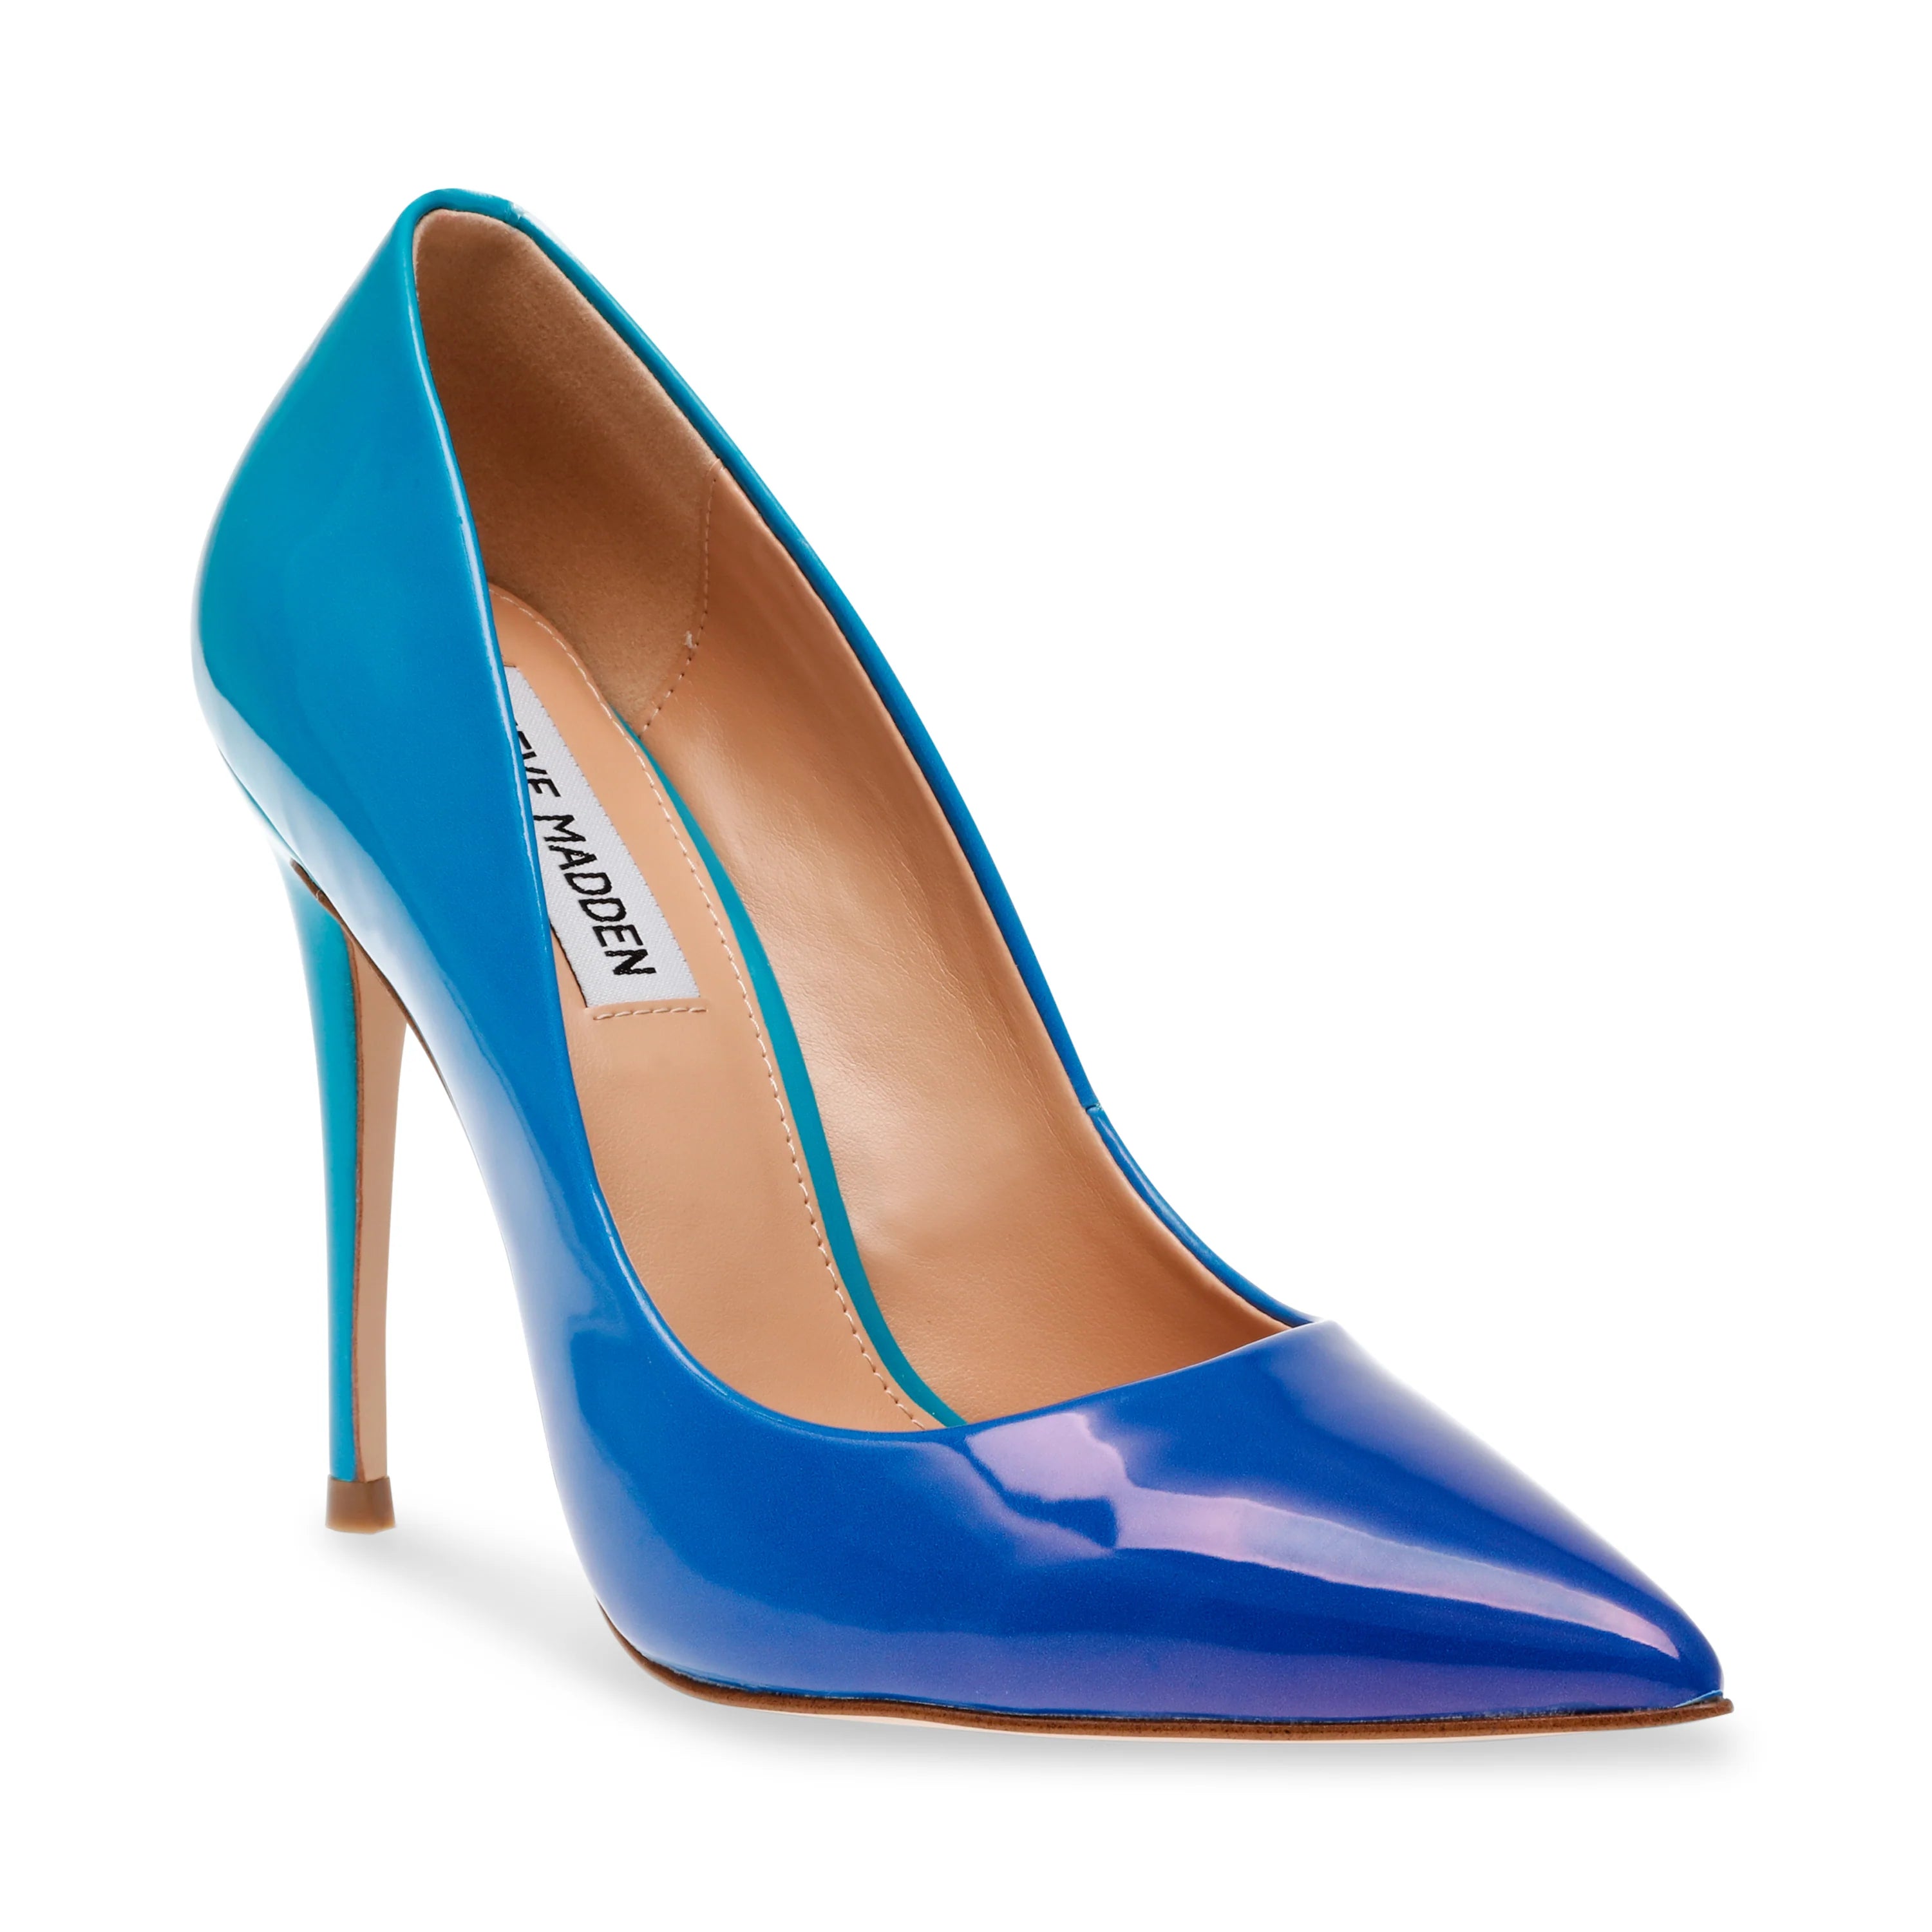 STEVE MADDEN OMBRE POINTED TOE PUMP IN BLUE